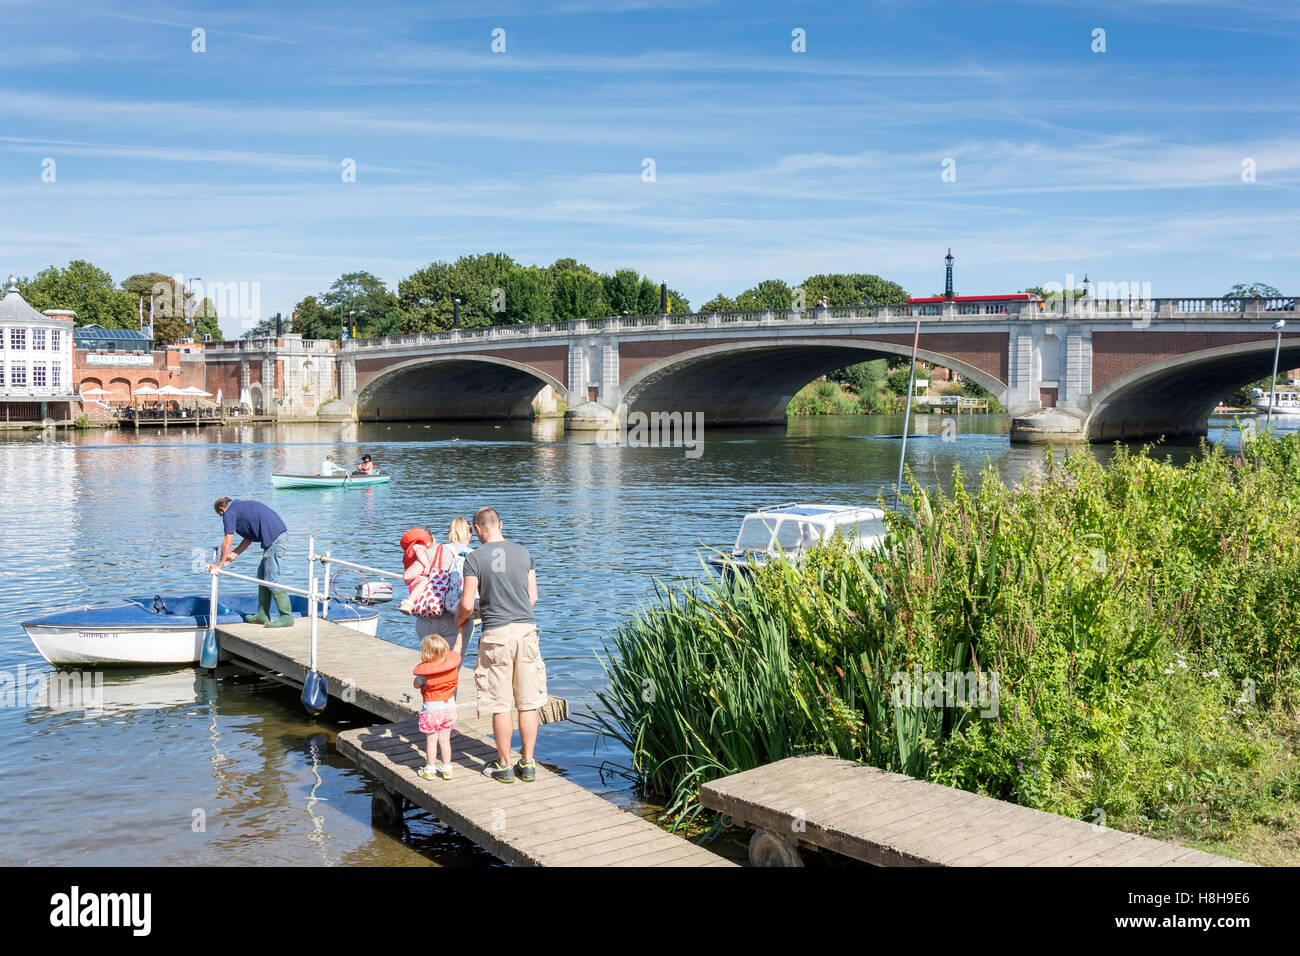 Family hiring boat by Hampton Court Bridge over River Thames, East Molesey, Surrey, England, United Kingdom Stock Photo